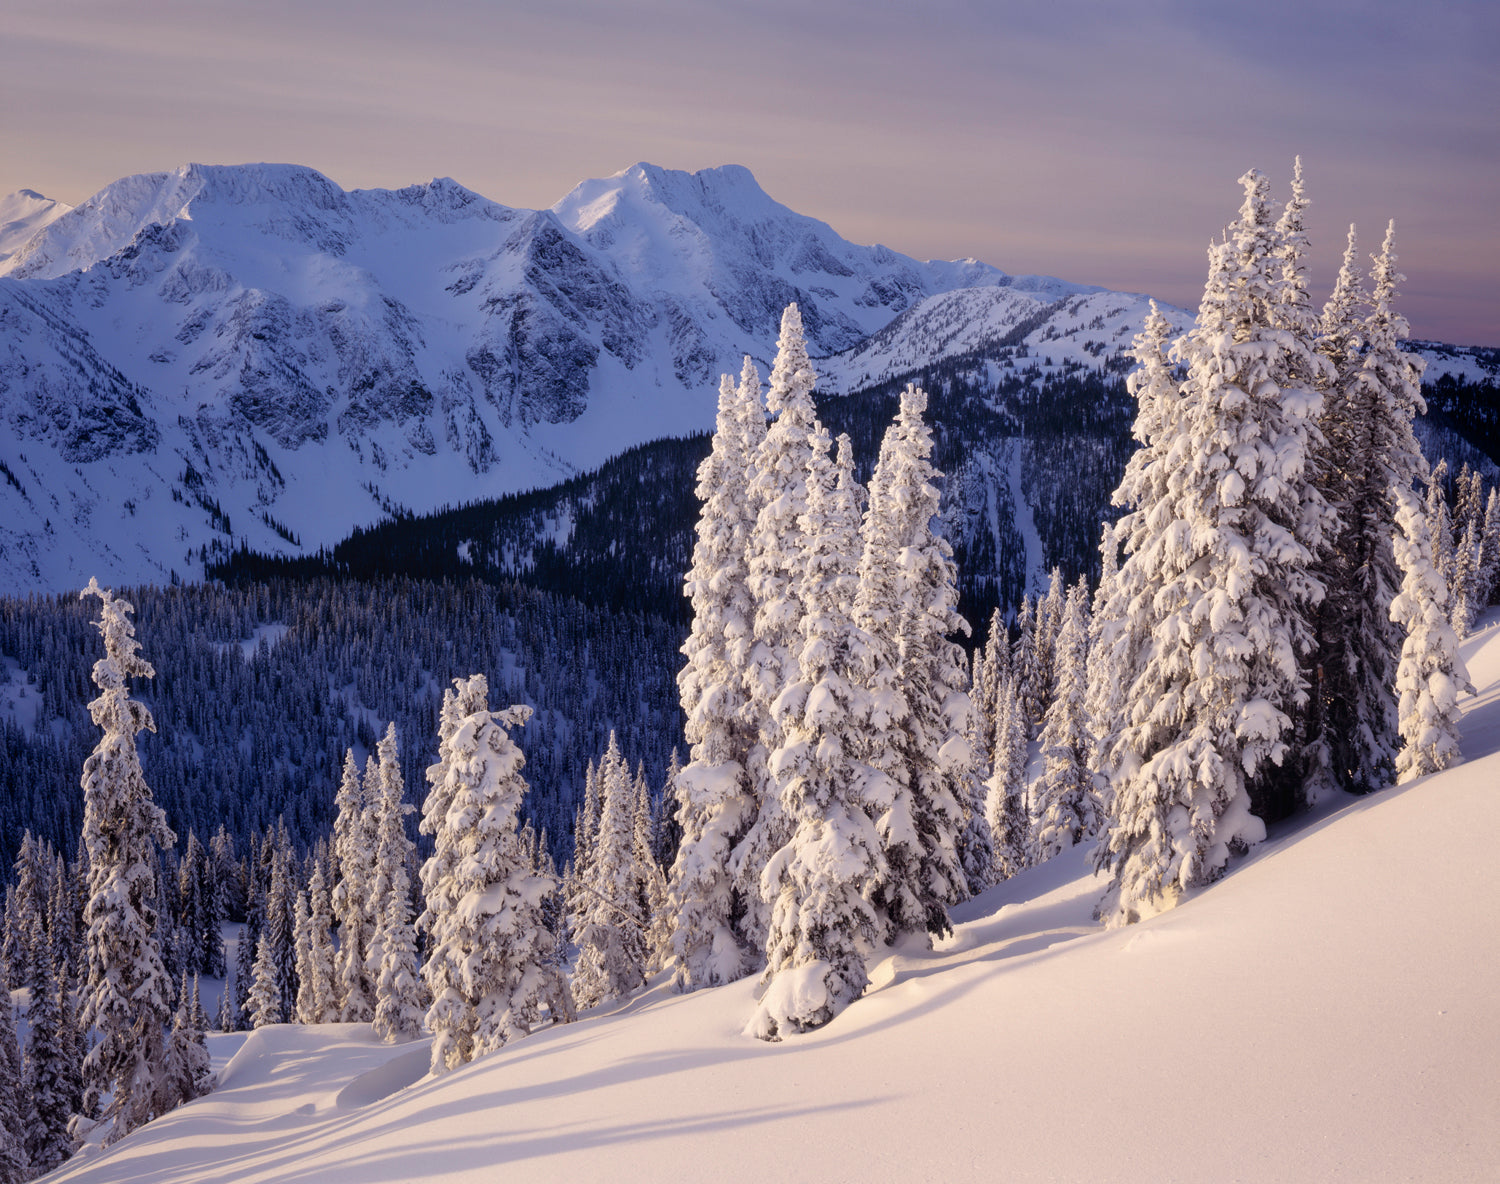 WINTER IN THE CARIBOO MOUNTAINS - ALAN MAJCHROWICZ HOLIDAY CARD